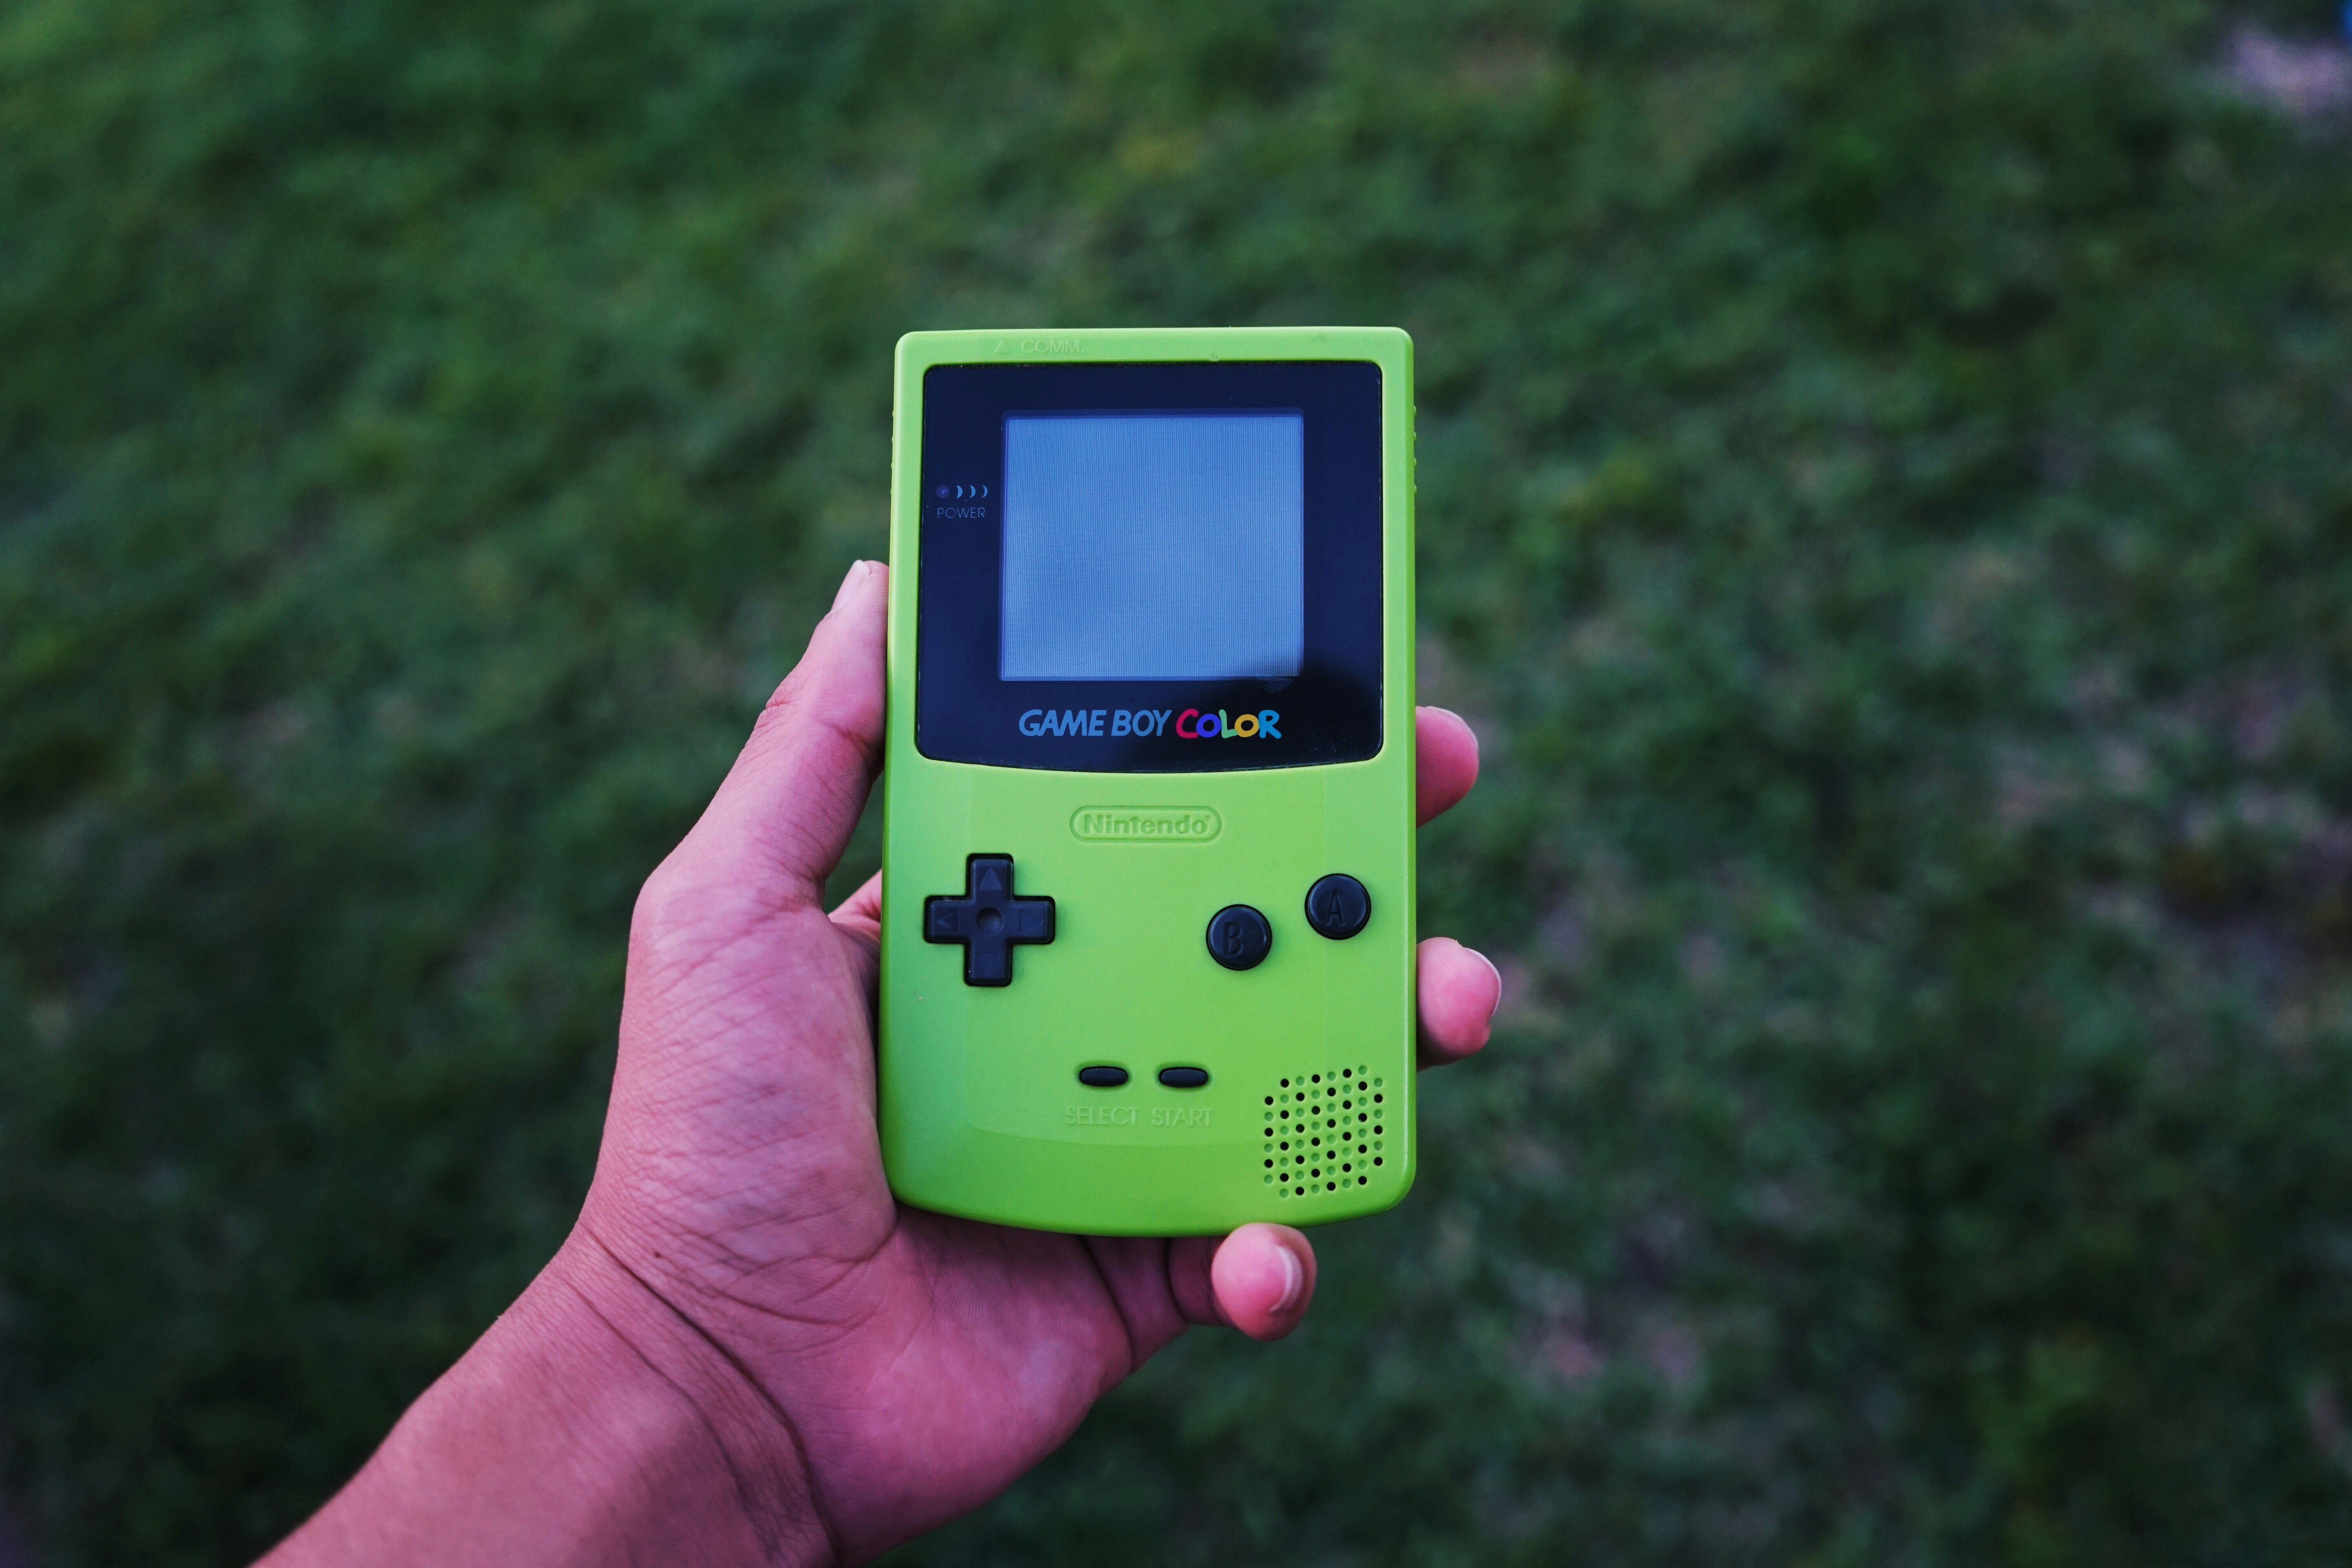 person holding a green Gameboy color console